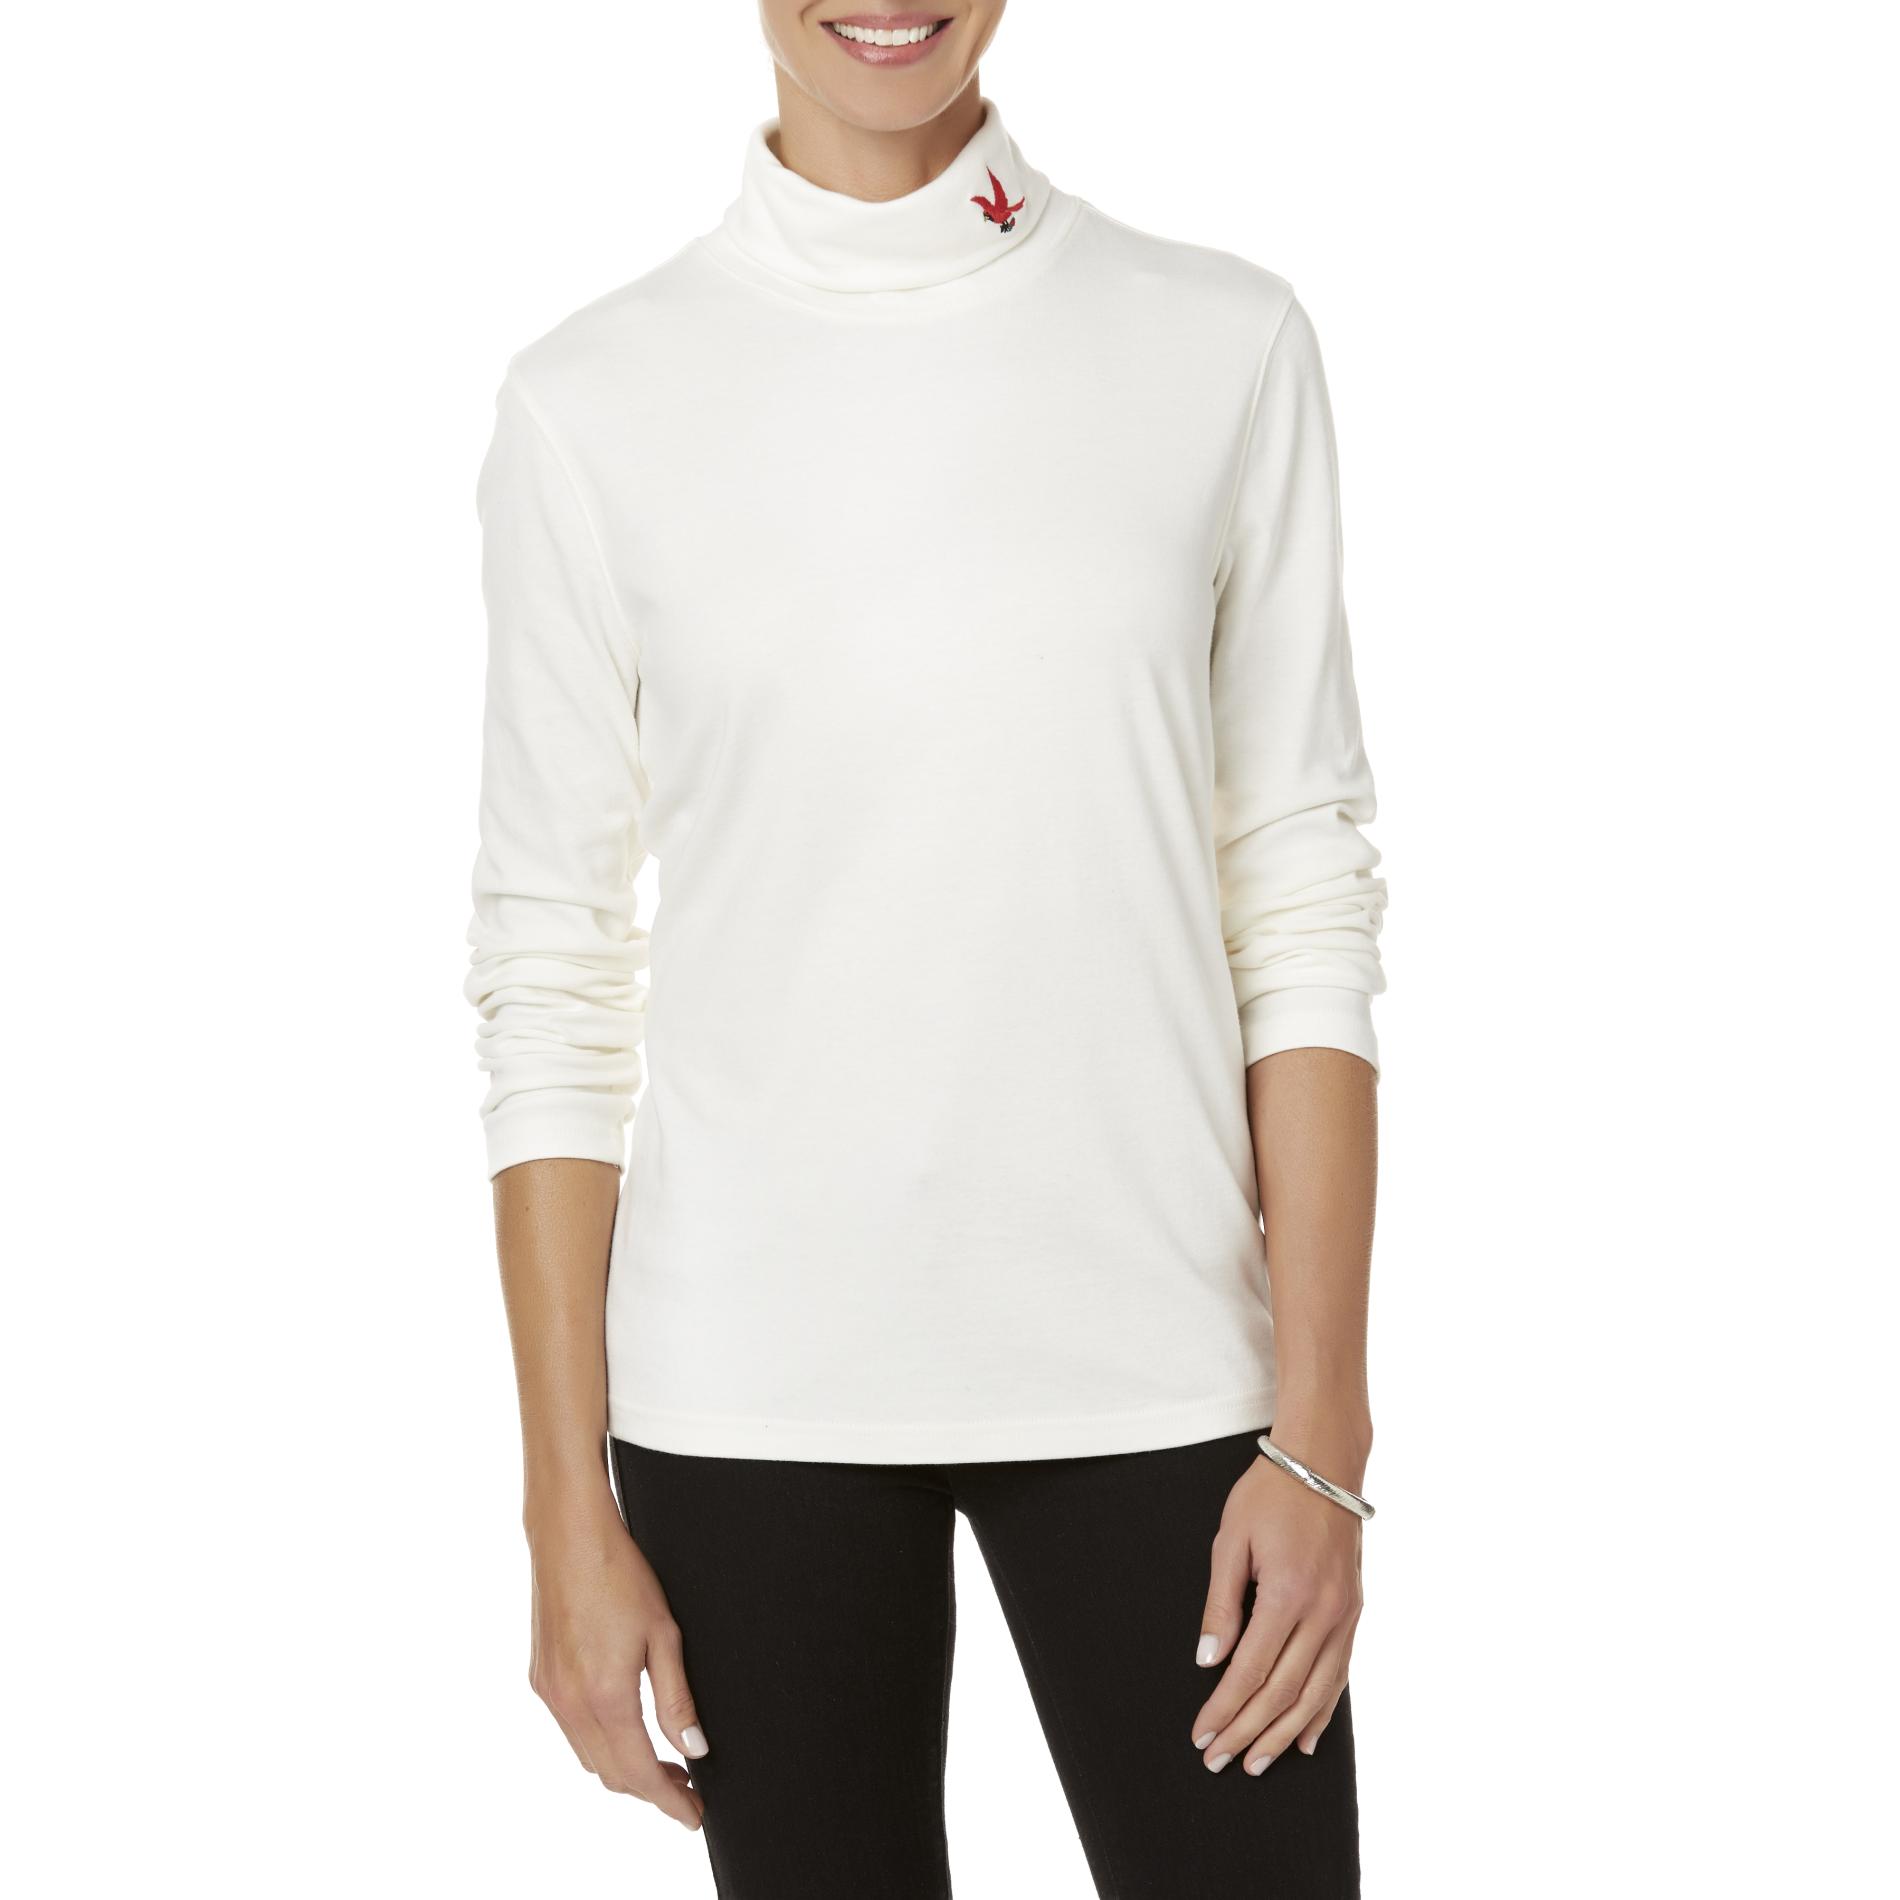 Holiday Editions Women's Embroidered Turtleneck Sweater - Cardinal